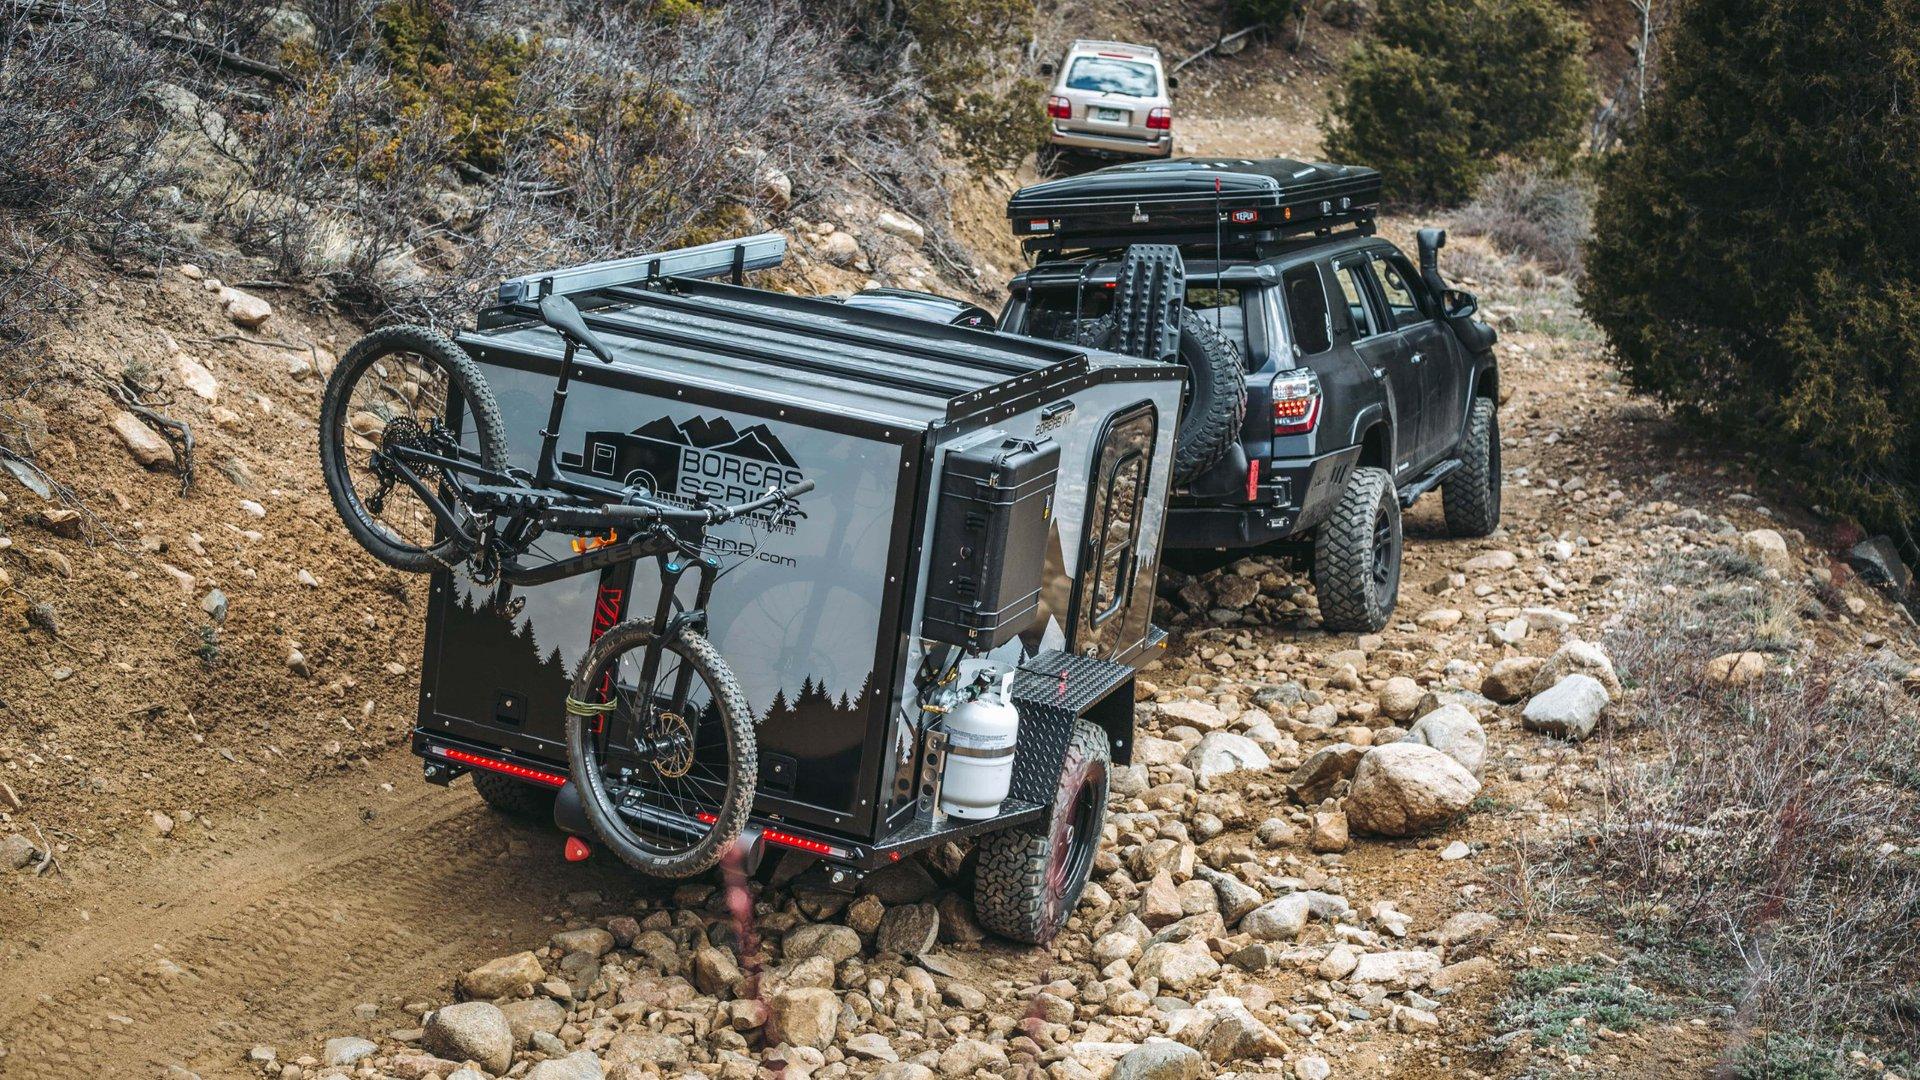 Boreas off-road camping trailer, one of the best off-road campers 